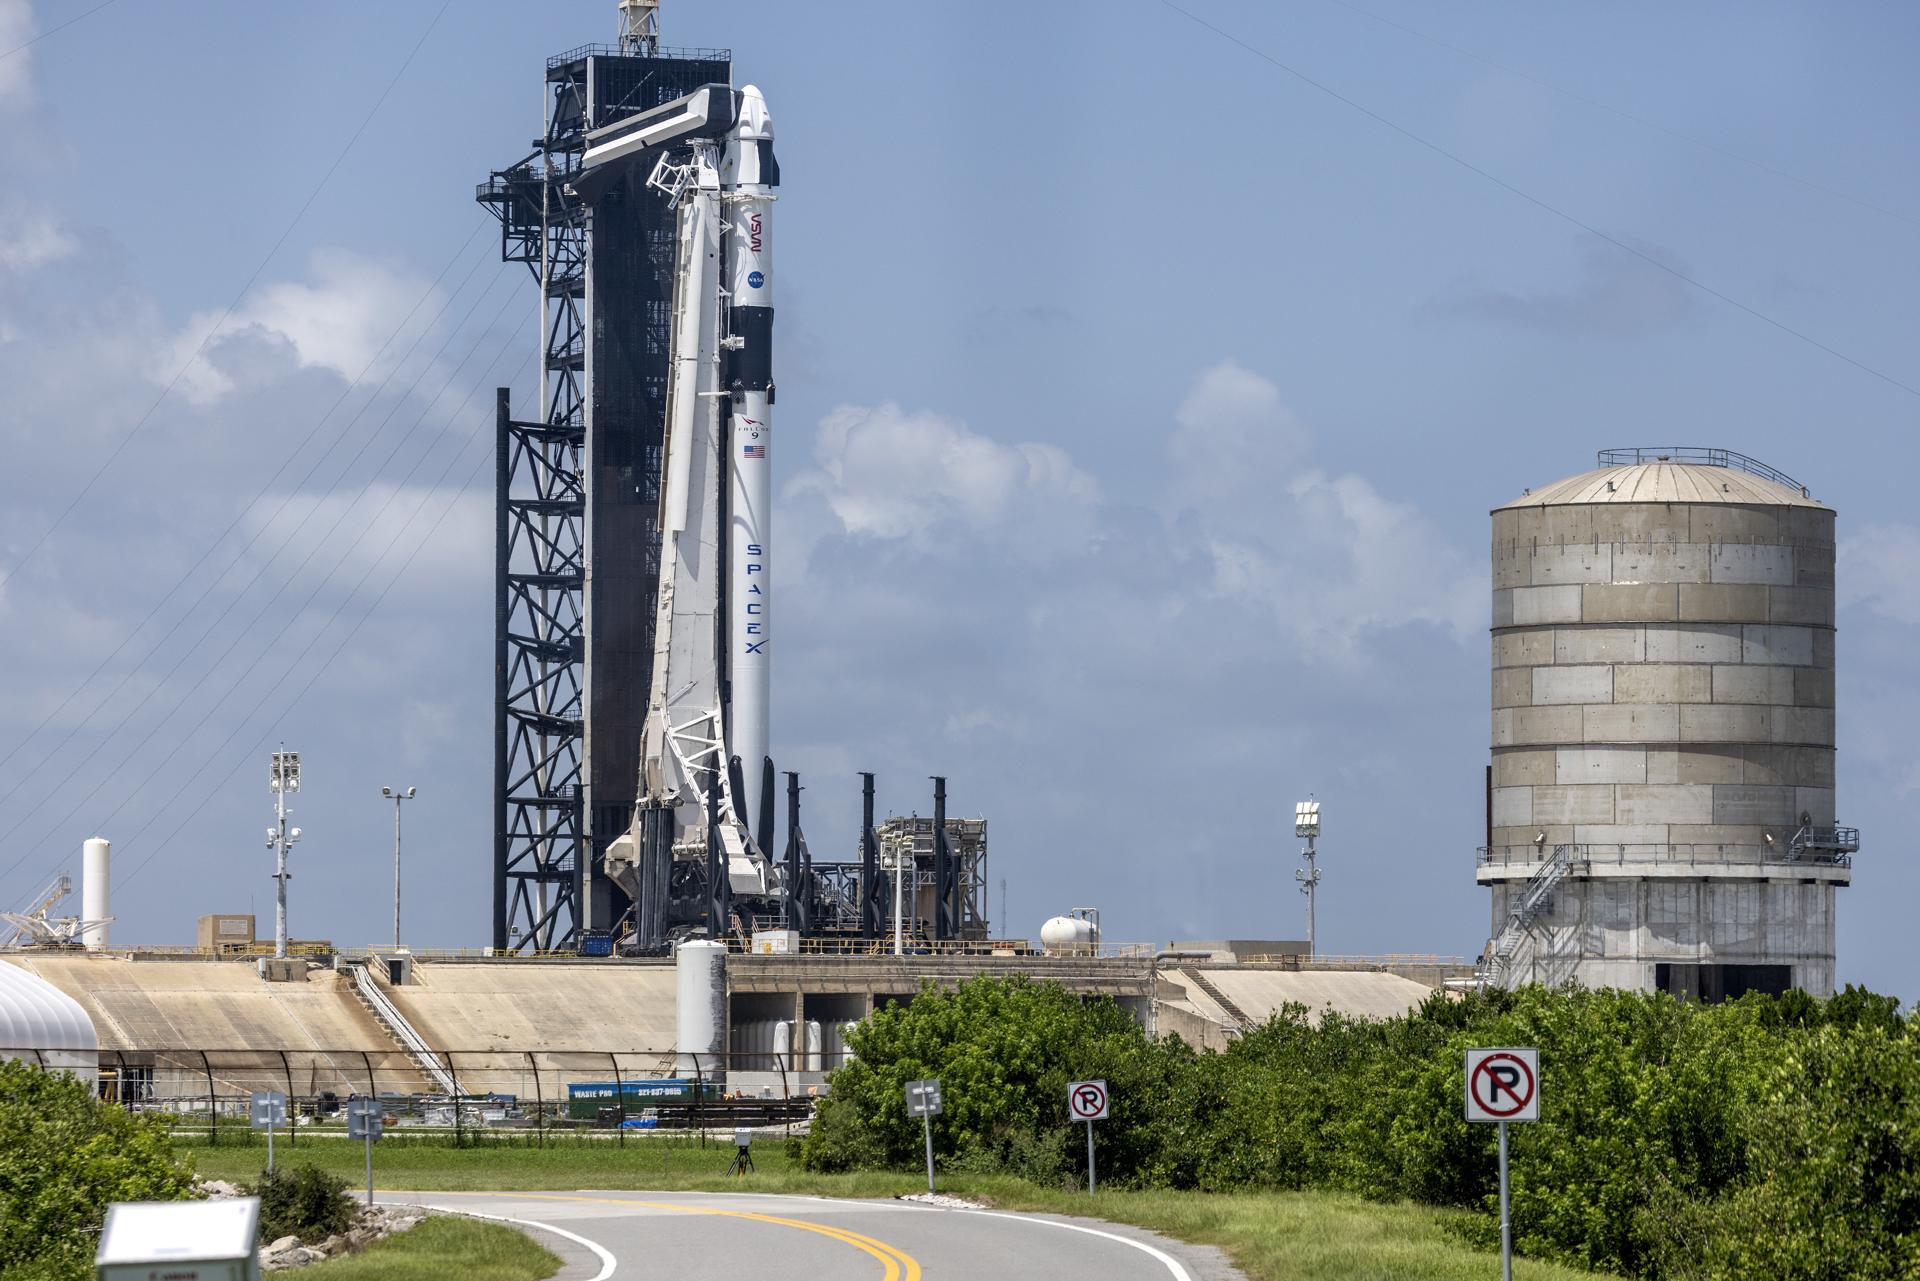 The SpaceX Falcon 9 rocket with the company's Dragon spacecraft onboard is seen on the launch pad at Launch Complex 39A as preparations continue for the Crew-7 mission at NASA's Kennedy Space Center in Florida, US, 24 August 2023. EFE-EPA/CRISTOBAL HERRERA-ULASHKEVICH
